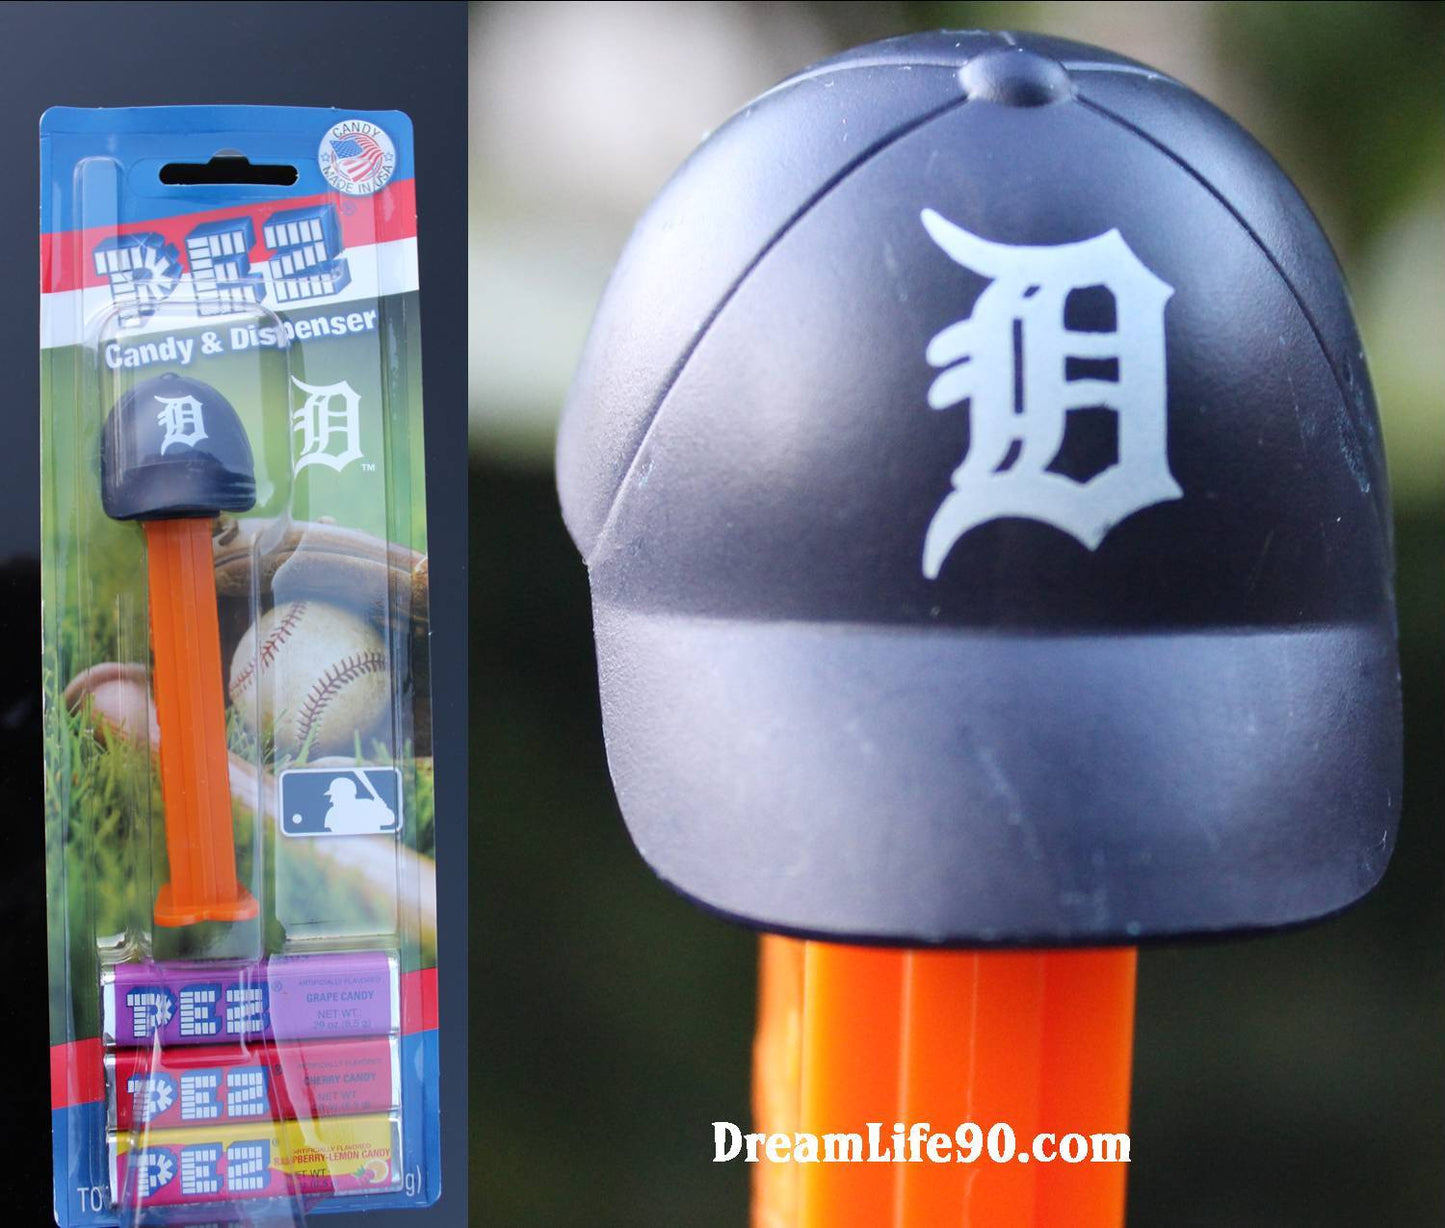 Detroit Tigers Baseball Cap Pez, Loose or Mint on Card, ONLY 1 LEFT